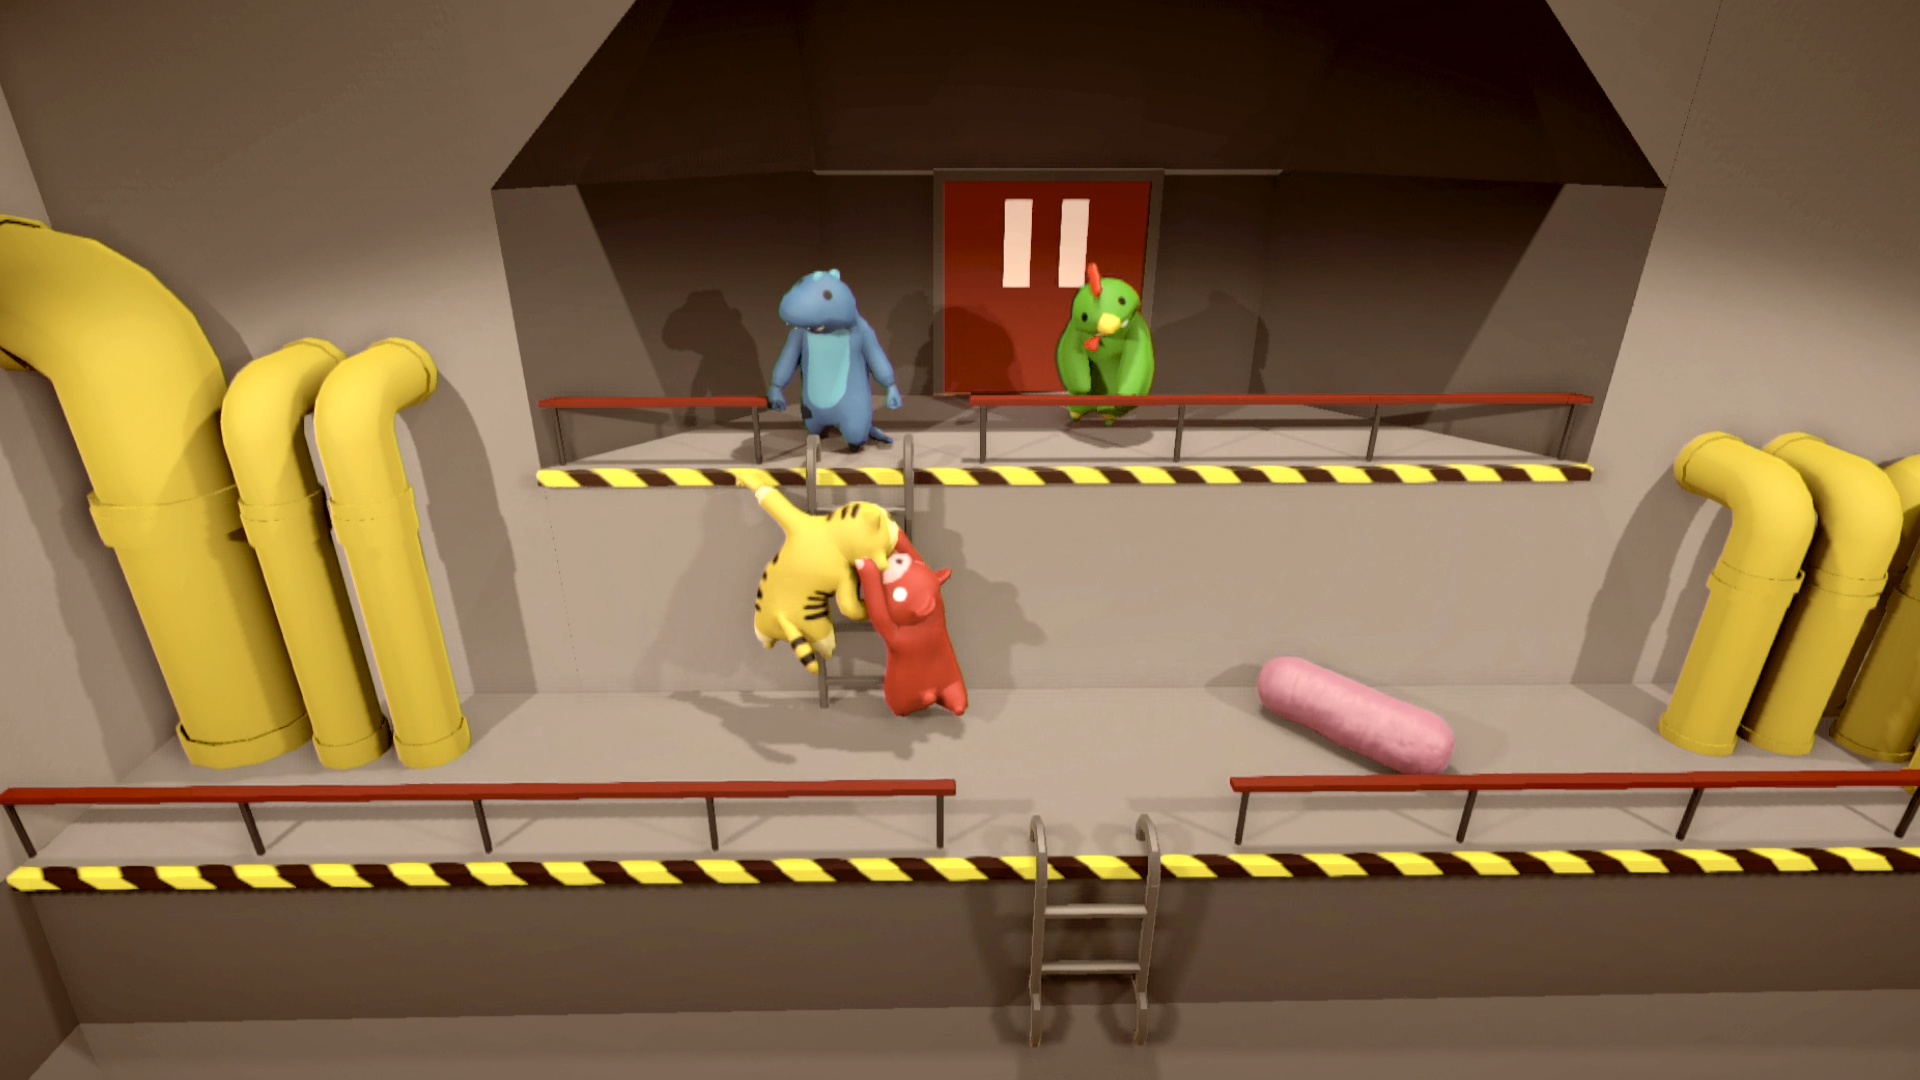 Gang Beasts brawls its way out of Early Access on December 12